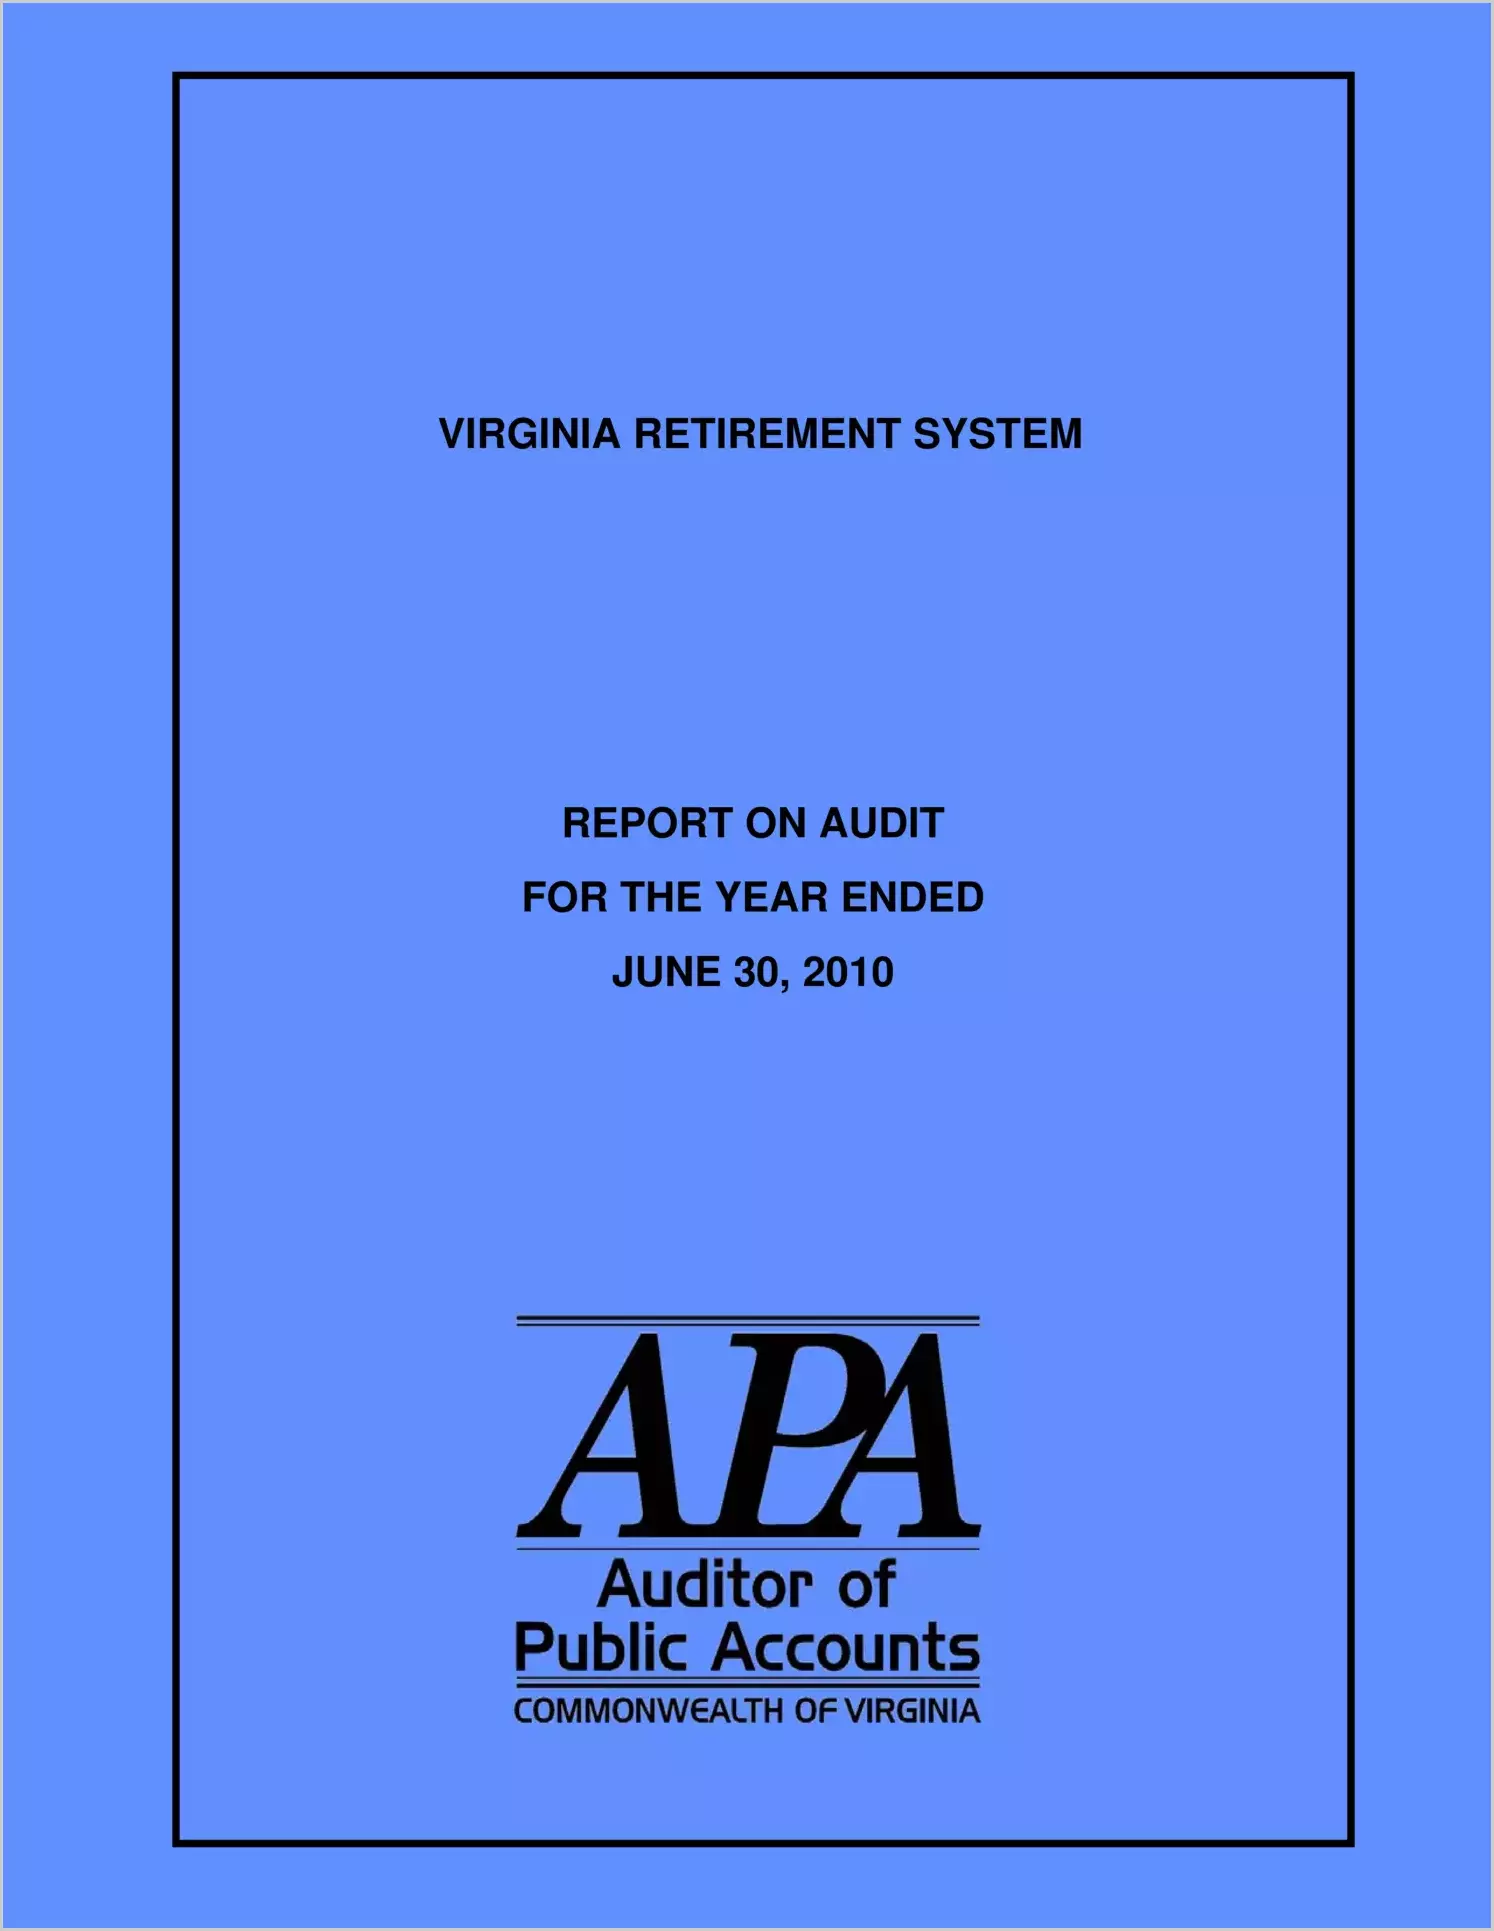 Virginia Retirement System for the year ended June 30, 2010